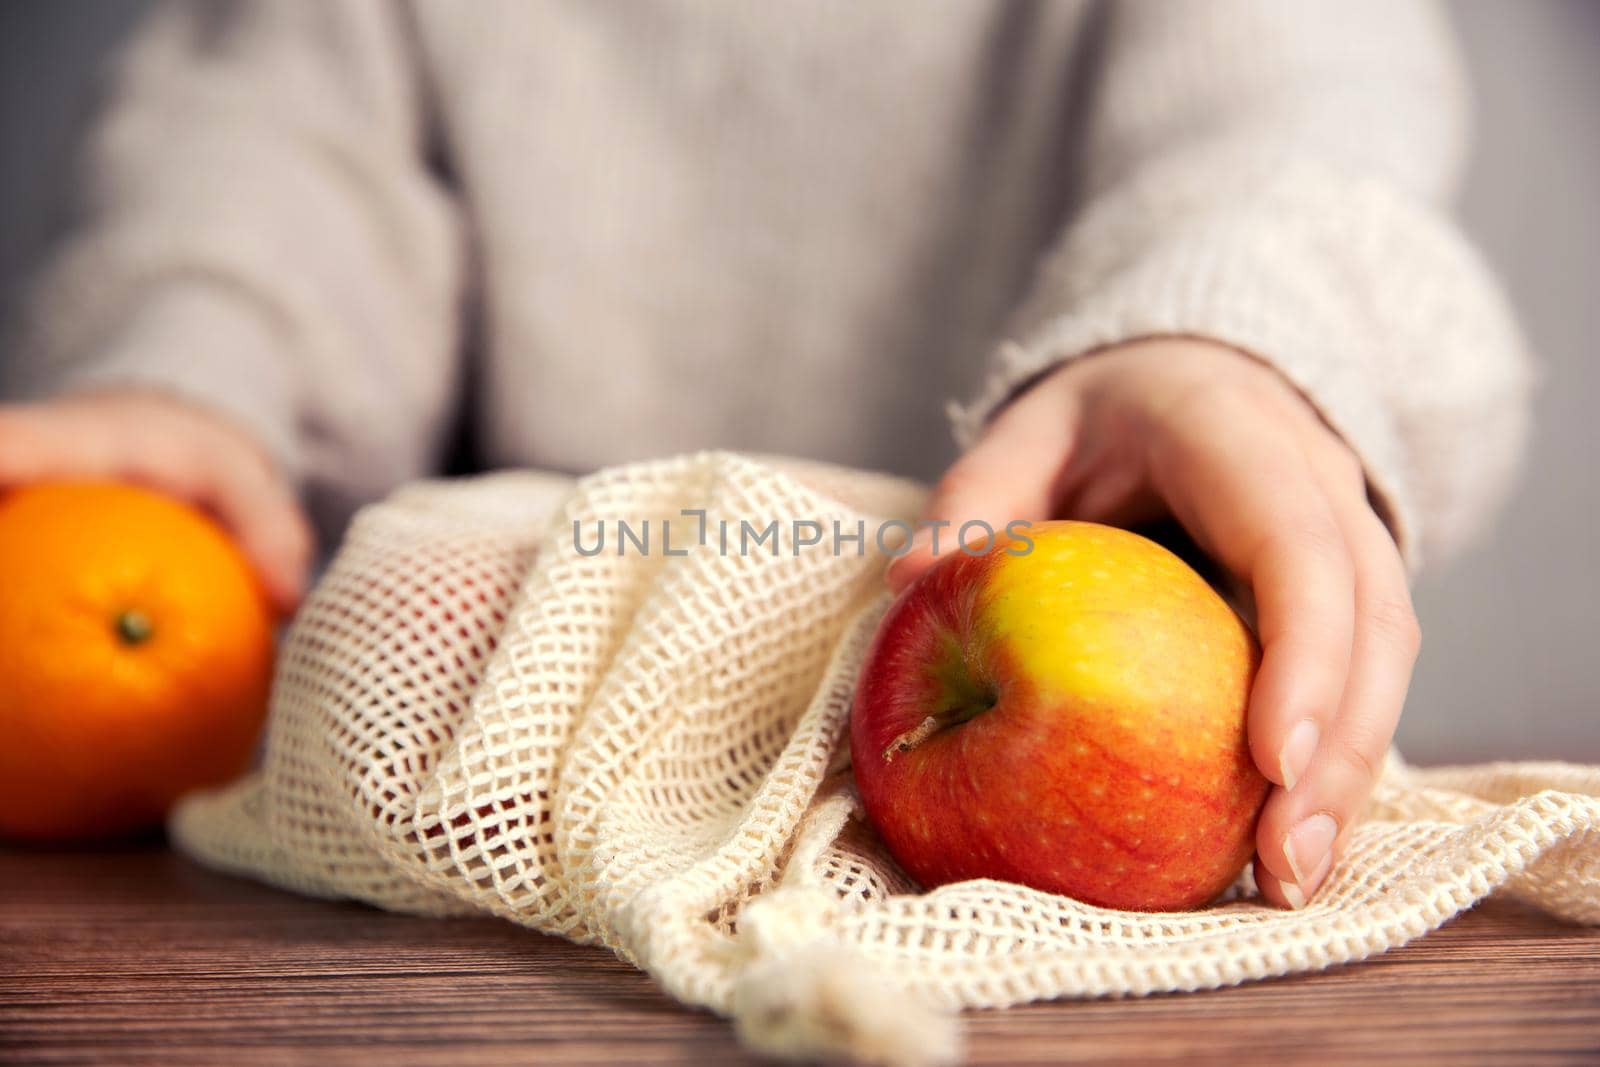 Female hand with environmentally friendly net bag for shopping groceries with Fresh fruit, Apples and oranges, eco friendly net on wooden table close up